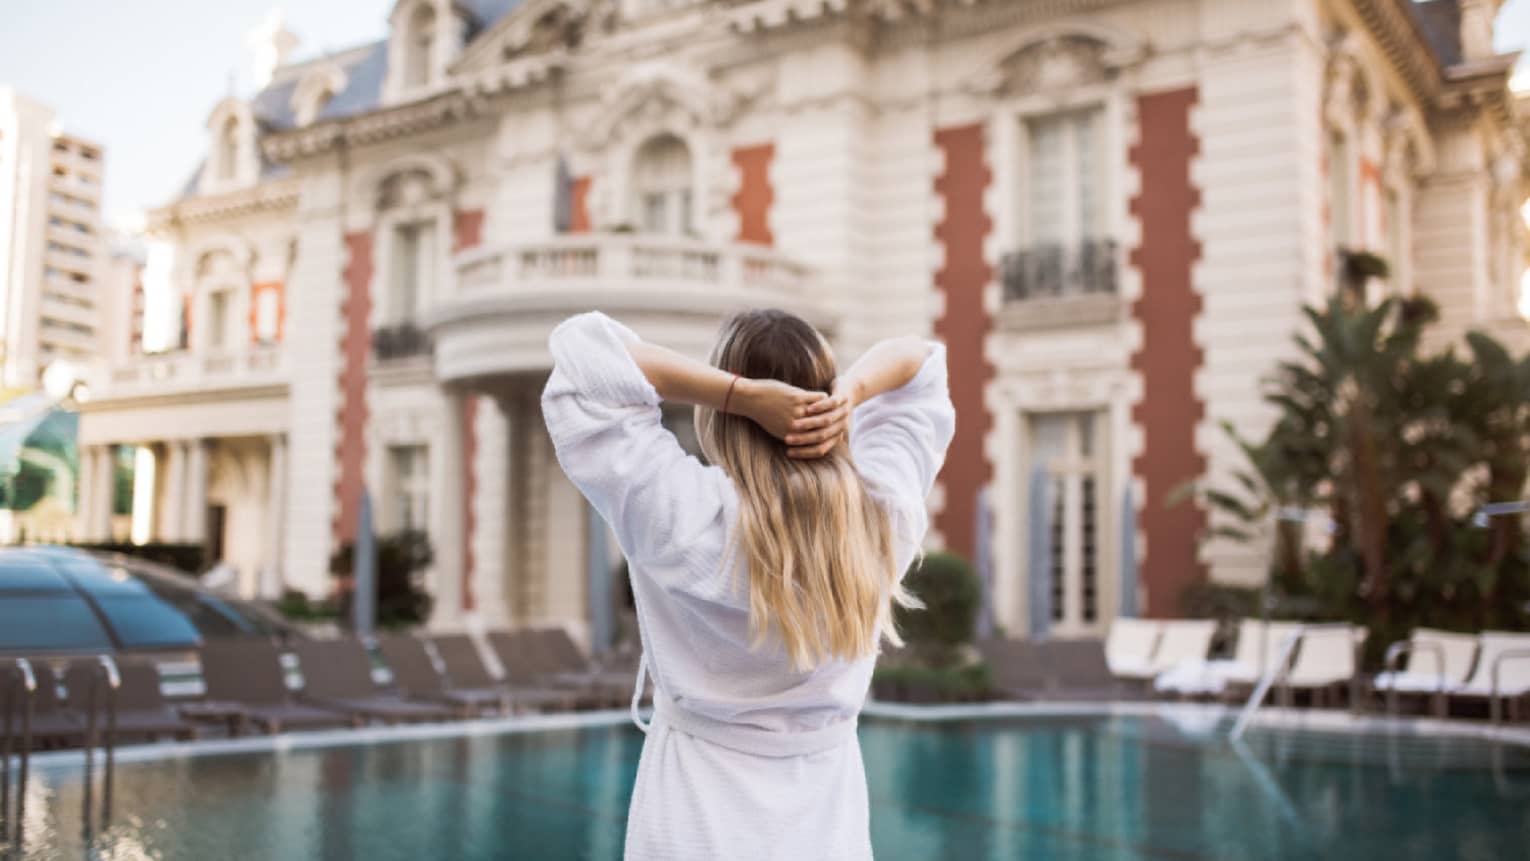 A woman in a white robe stretches by an outdoor pool, the hotel in the background